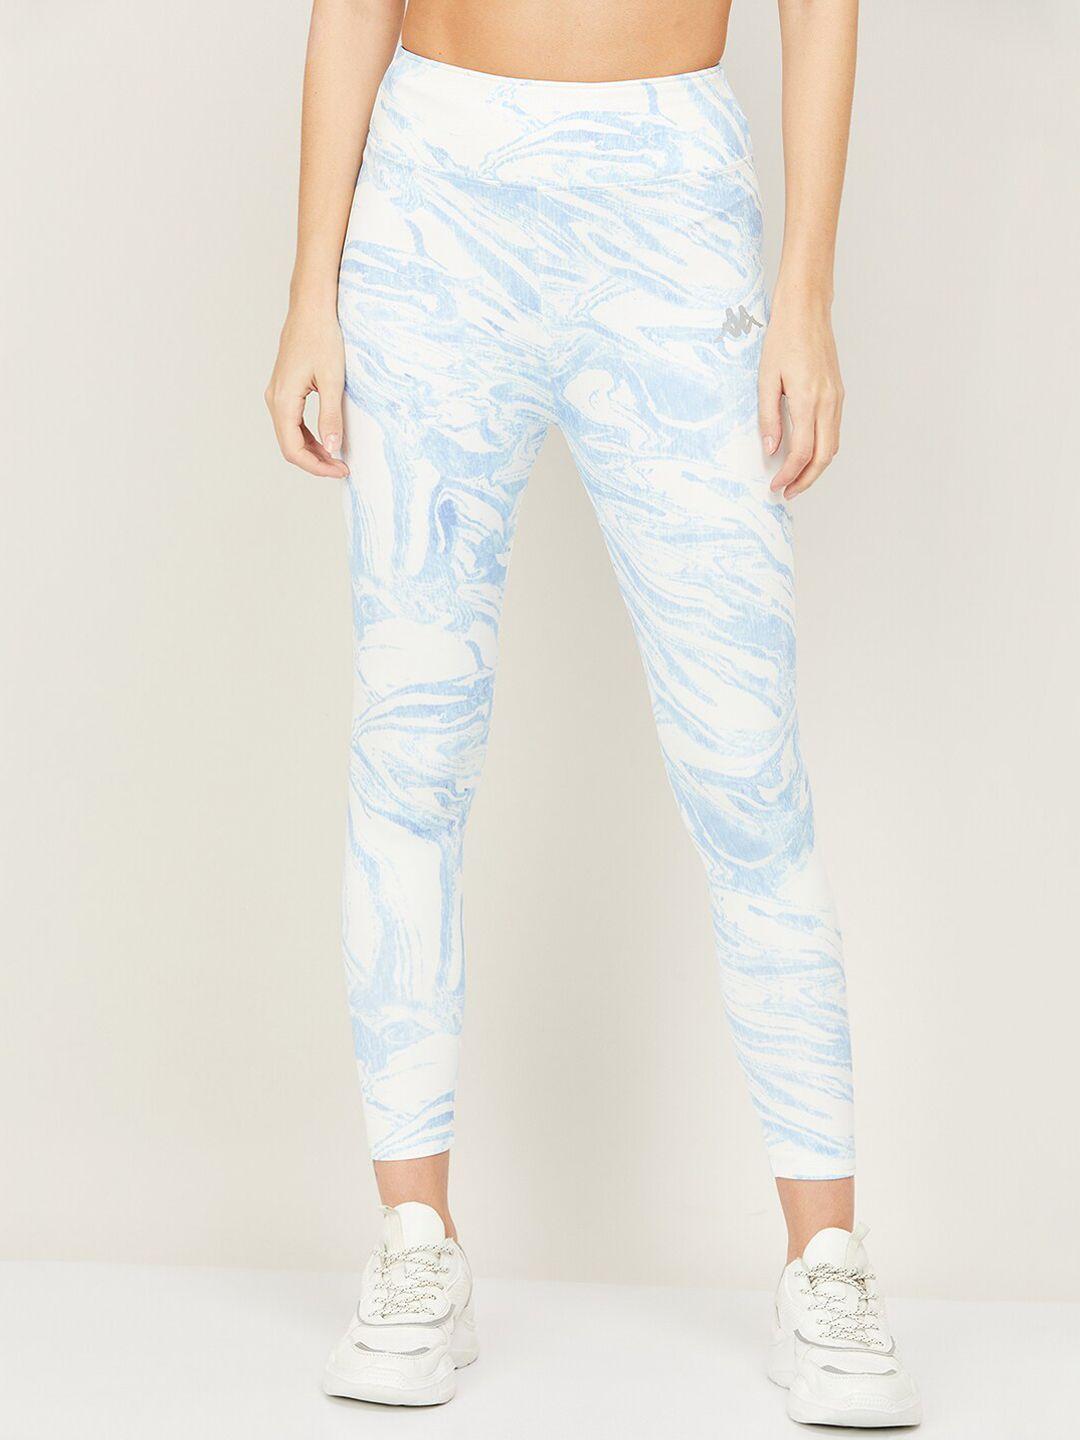 kappa women white tie and dyed cotton ankle-length tights